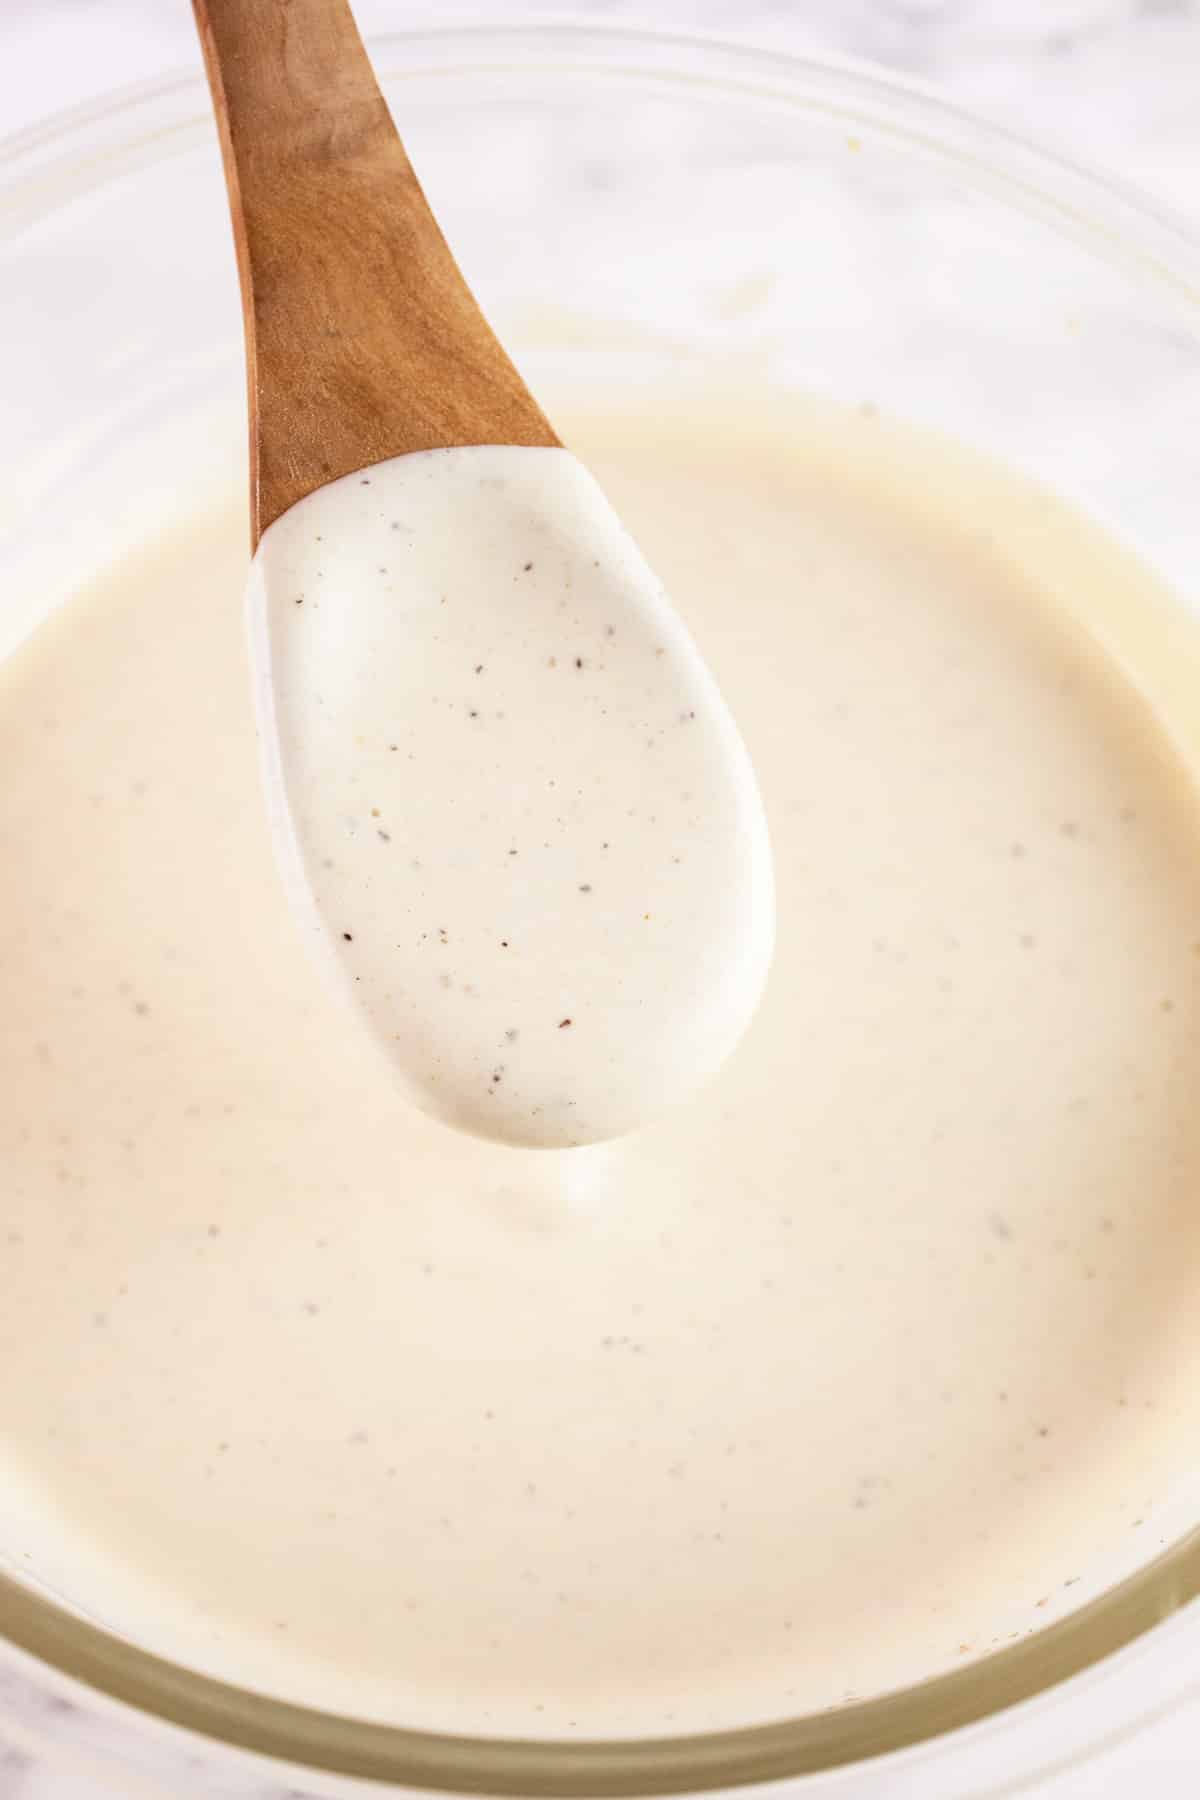 Creamy dressing on wooden spoon lifted from glass bowl.